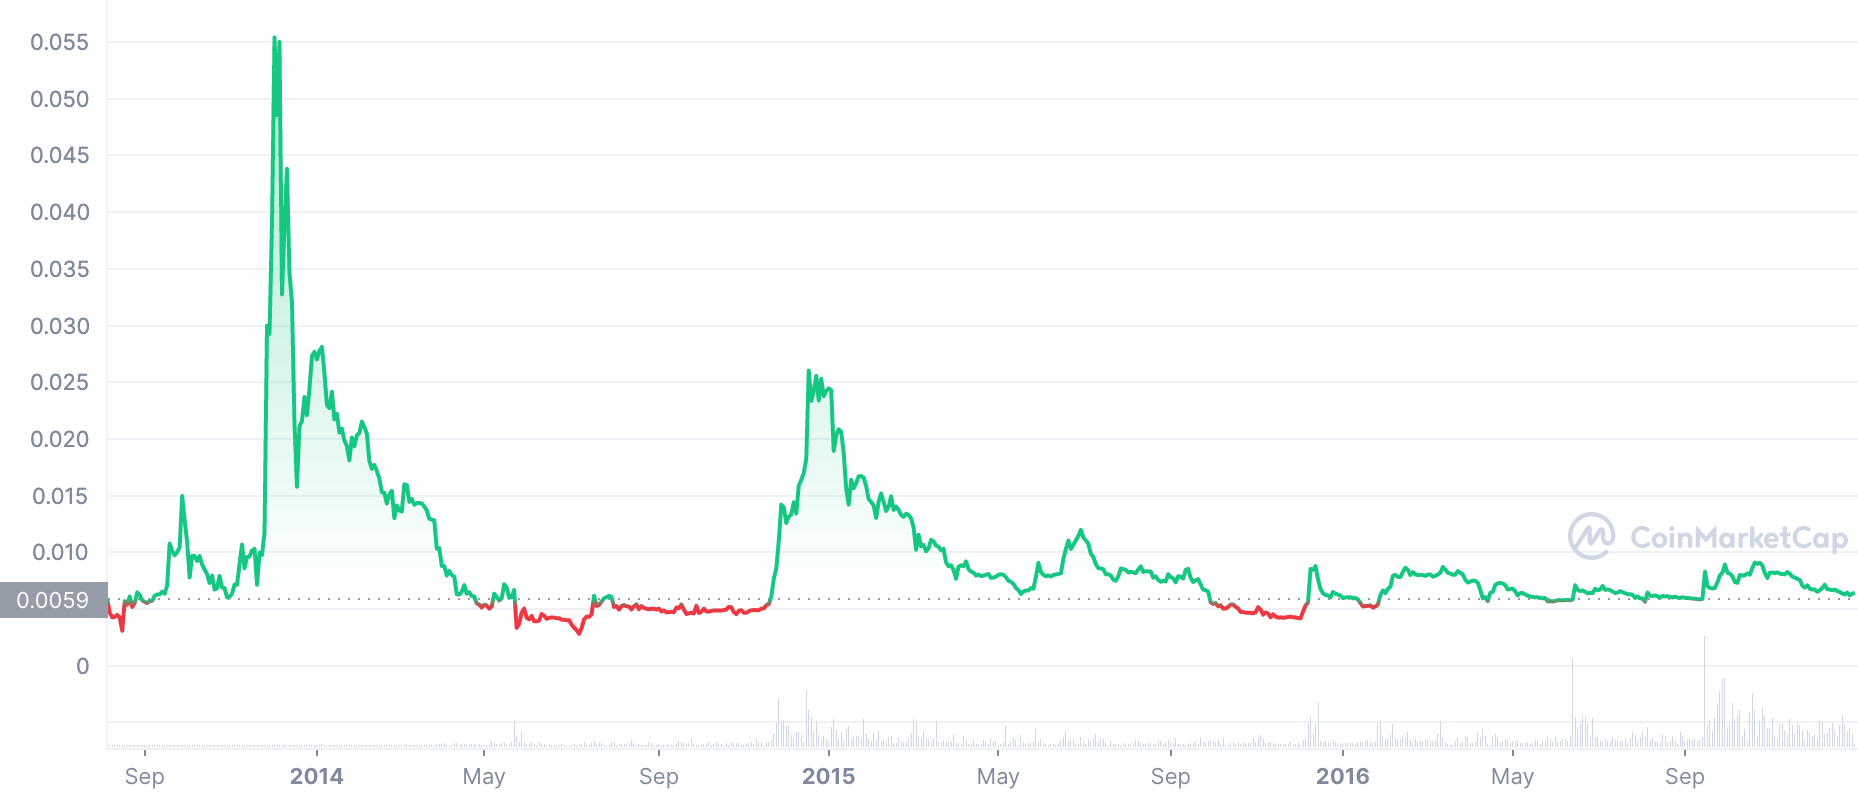 xrp prices in 2013-2016